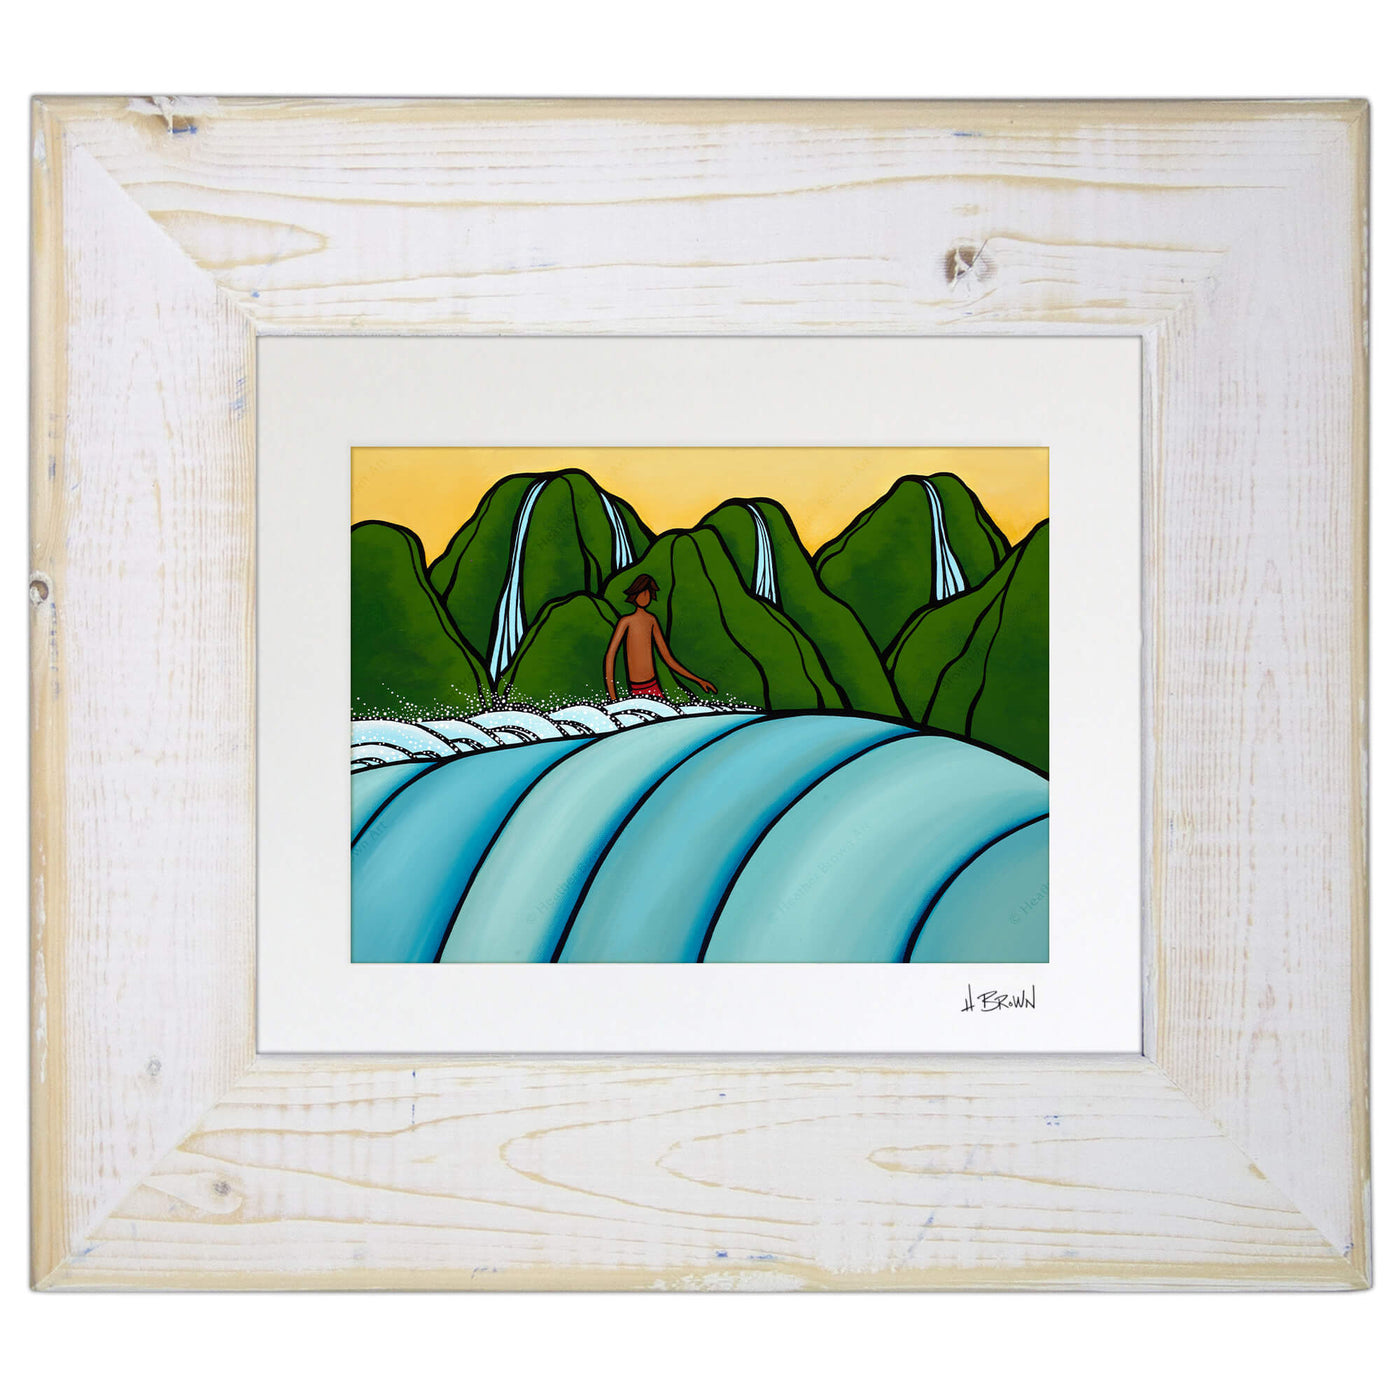 Matted art print in white wooden frame by Hawaii artist Heather Brown featuring a male surfer at Kauai surf break "Pinetrees"